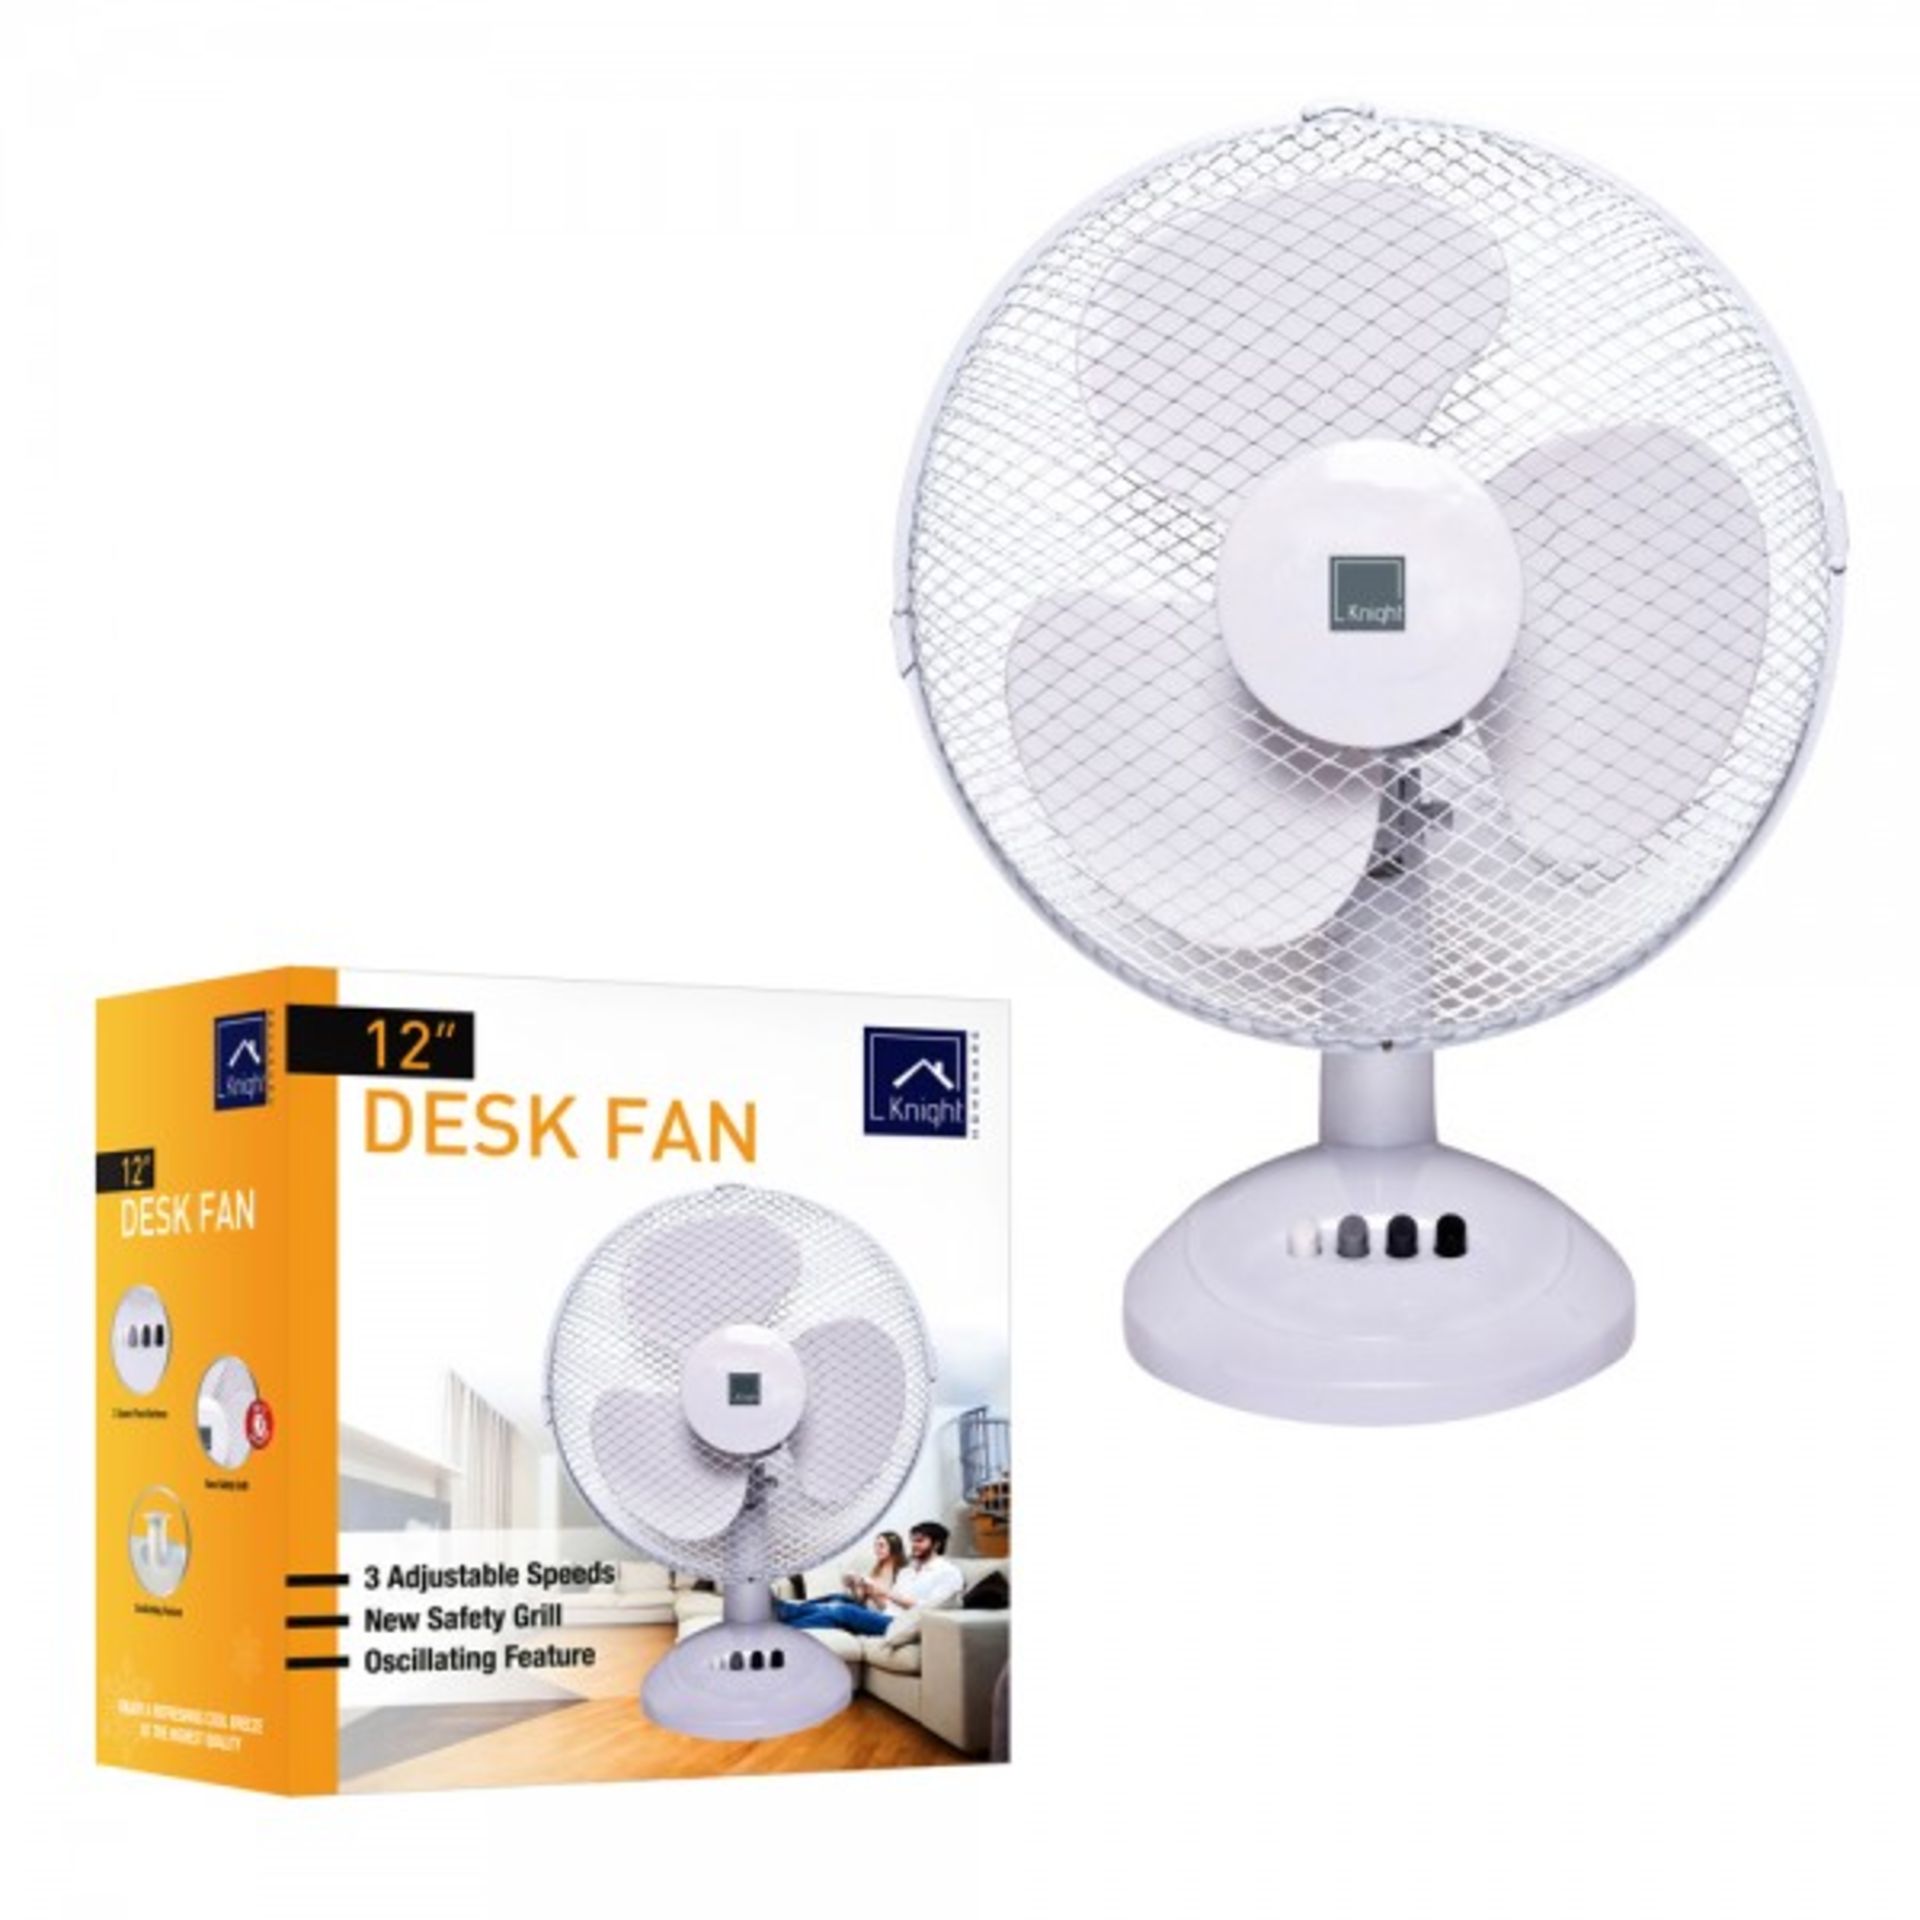 V *TRADE QTY* Brand New 12" Desk Top Oscillating Three Speed Fan X 4 YOUR BID PRICE TO BE MULTIPLIED